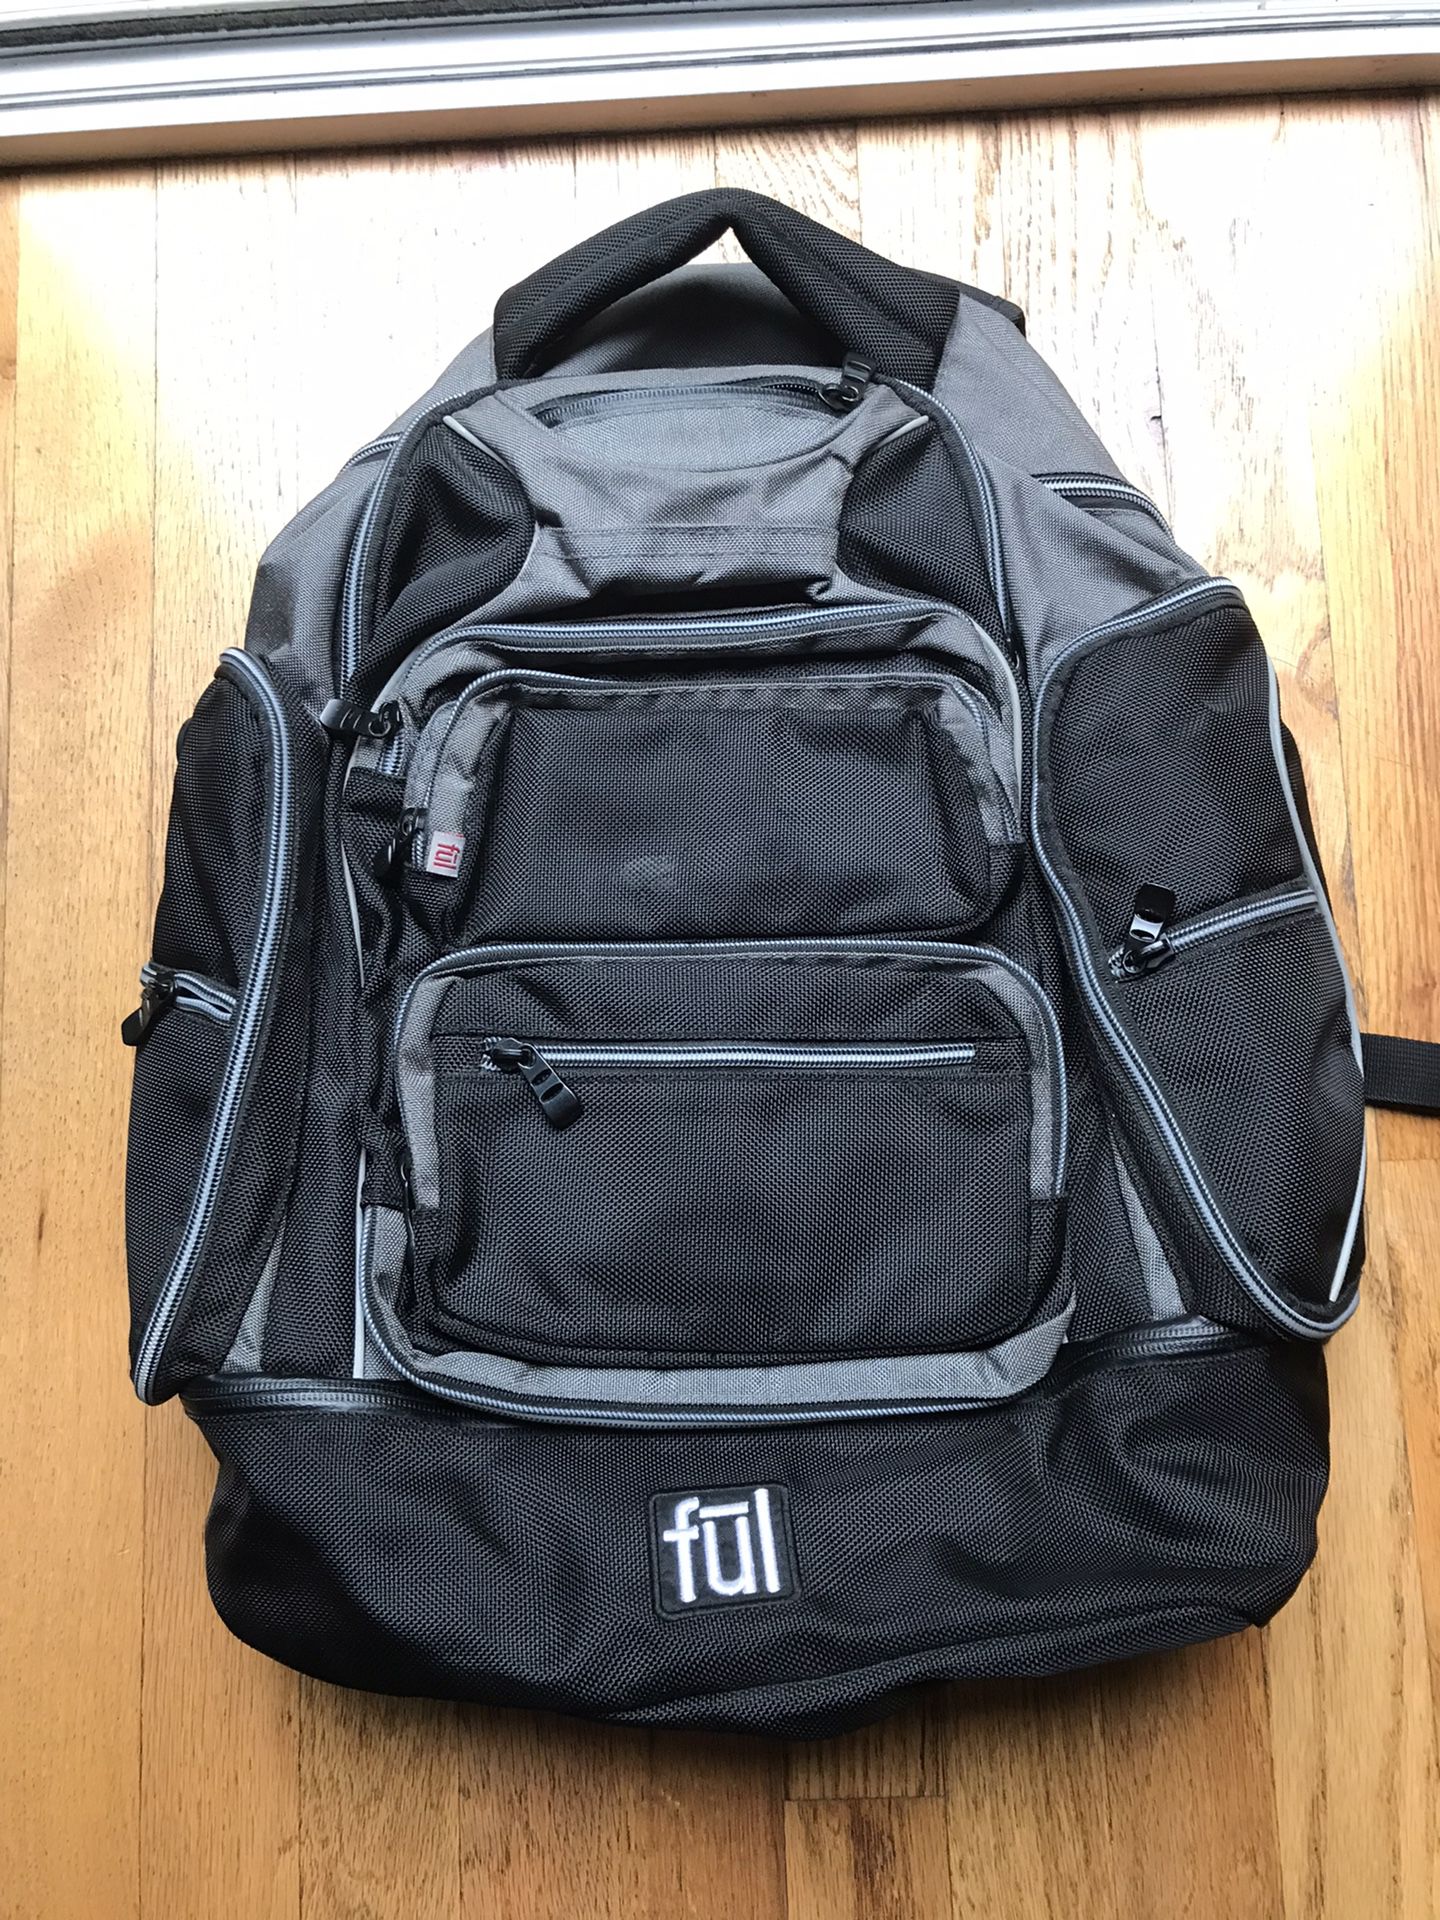 Backpack Made By Ful